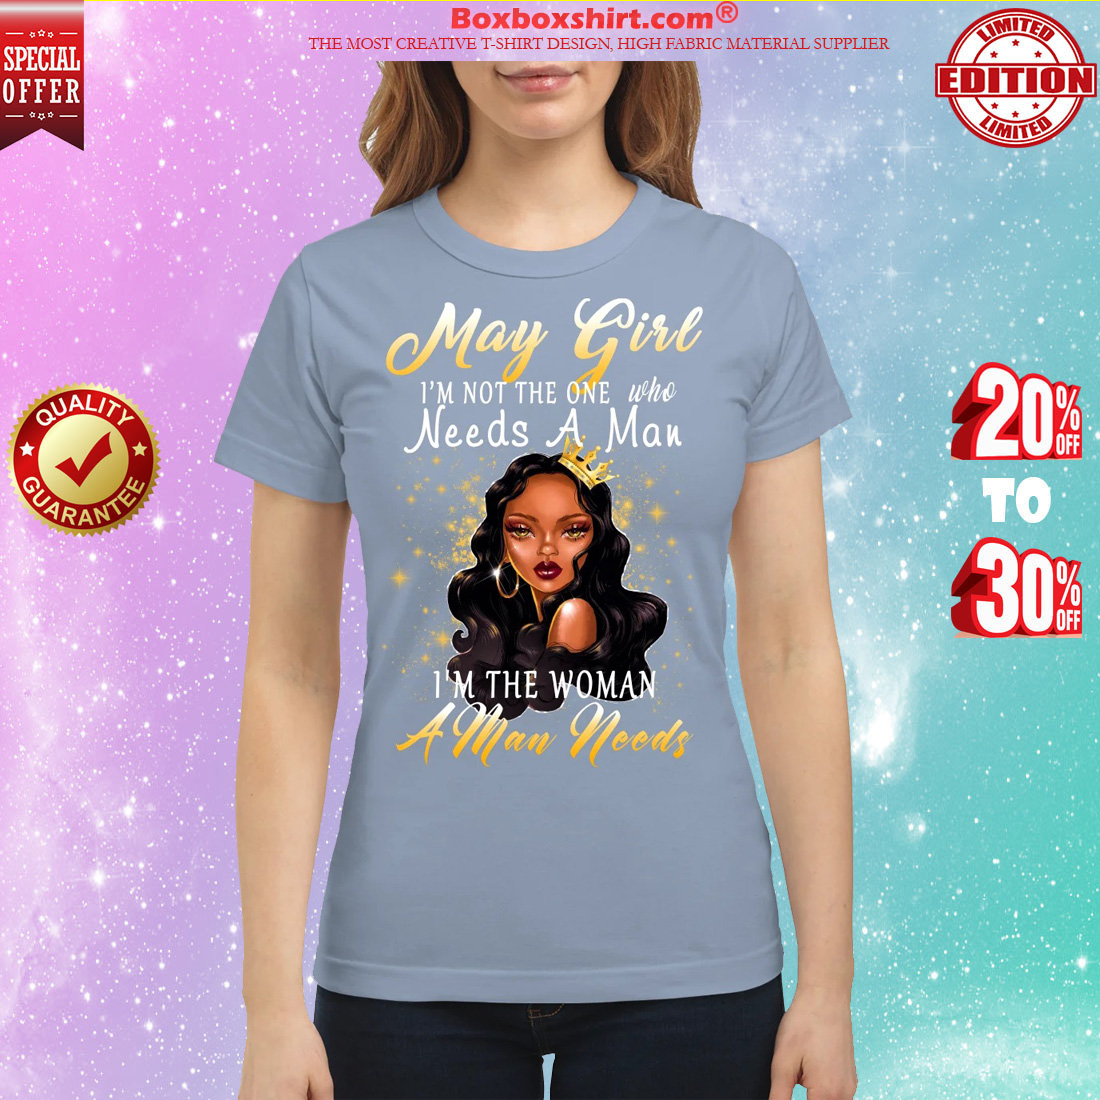 May girl I'm not the one who needs a man classic shirt